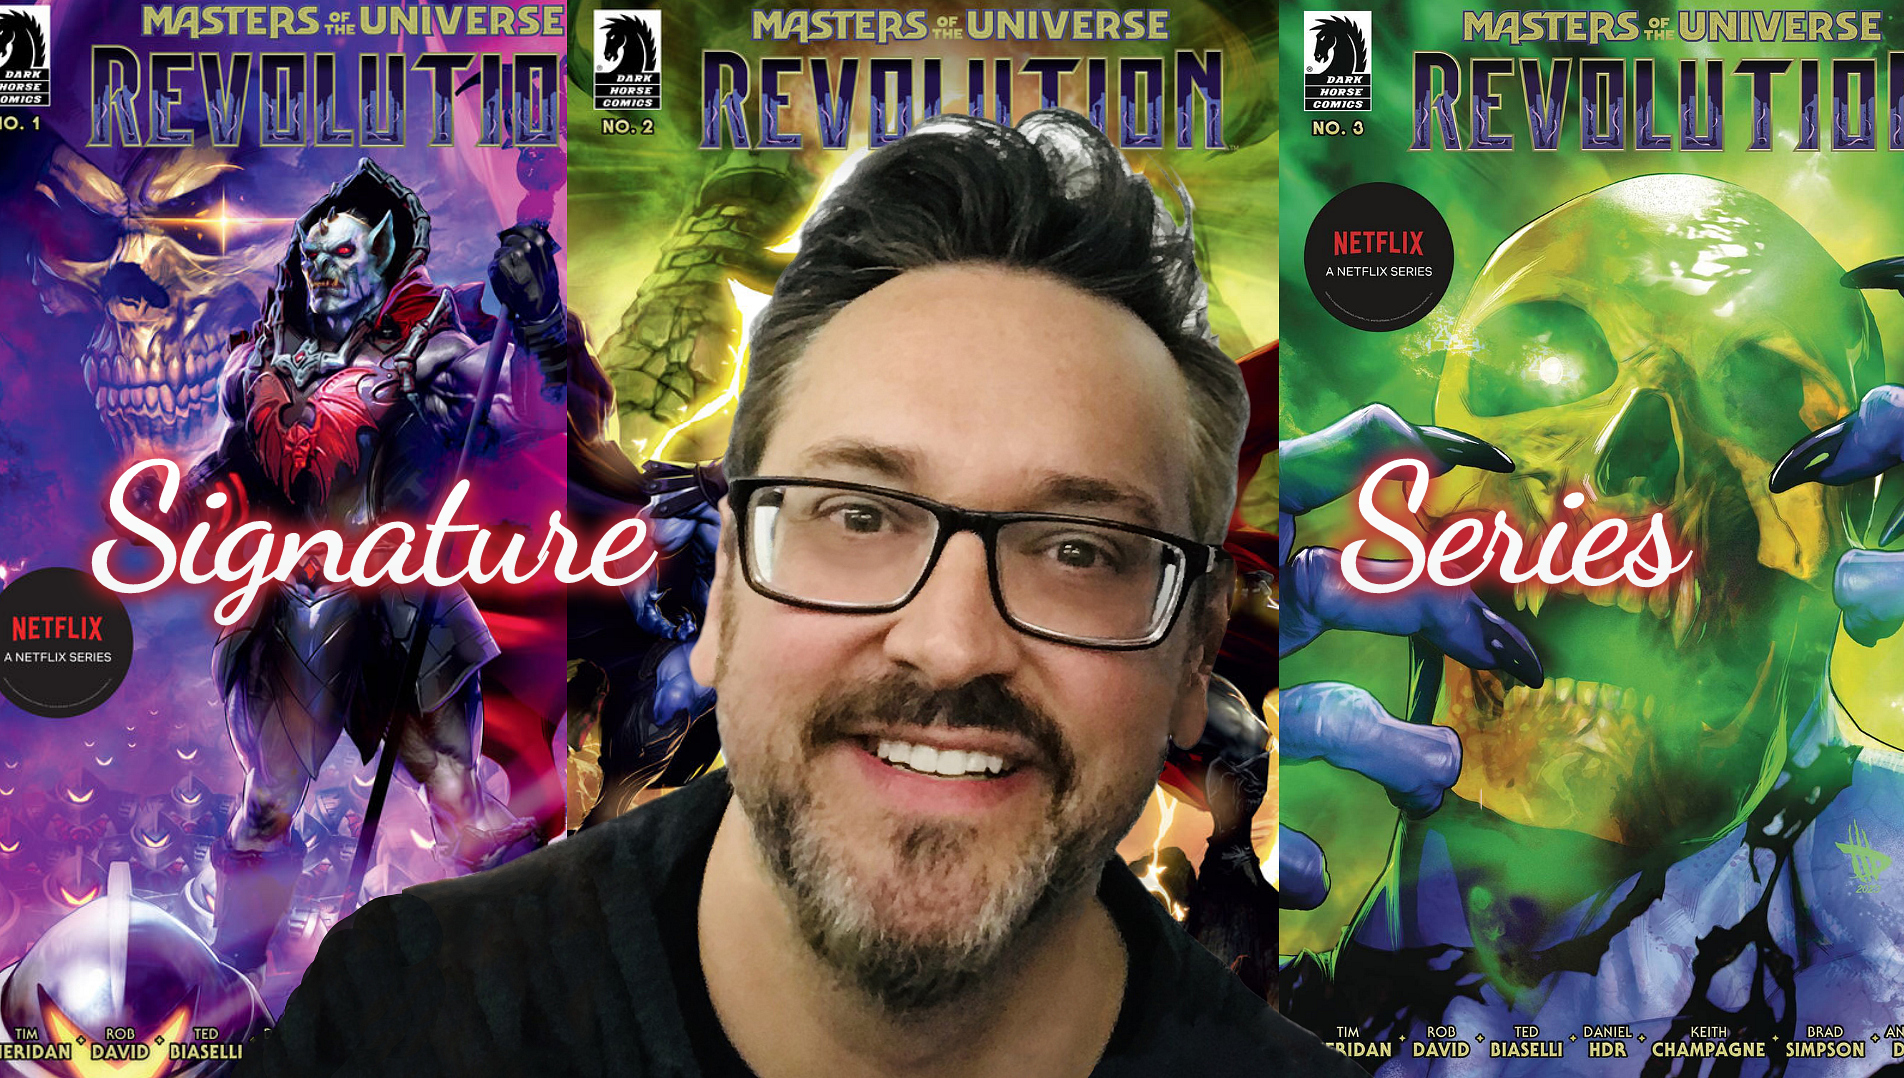 SIGNATURE SERIES: Get the ”Masters of the Universe: Revolution” Prequel Comic Series #1-4 Signed by Tim Sheridan